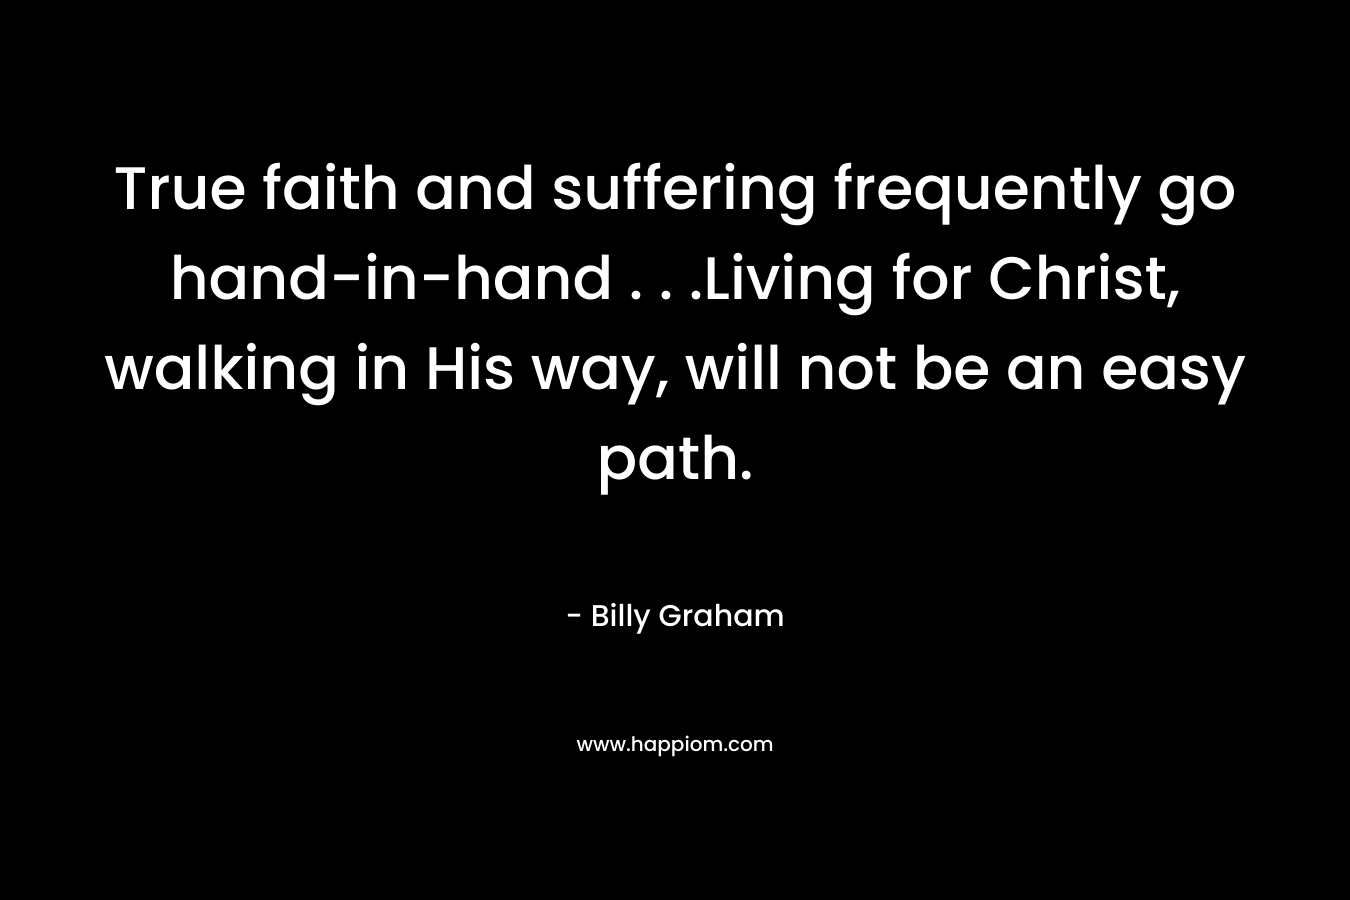 True faith and suffering frequently go hand-in-hand . . .Living for Christ, walking in His way, will not be an easy path.